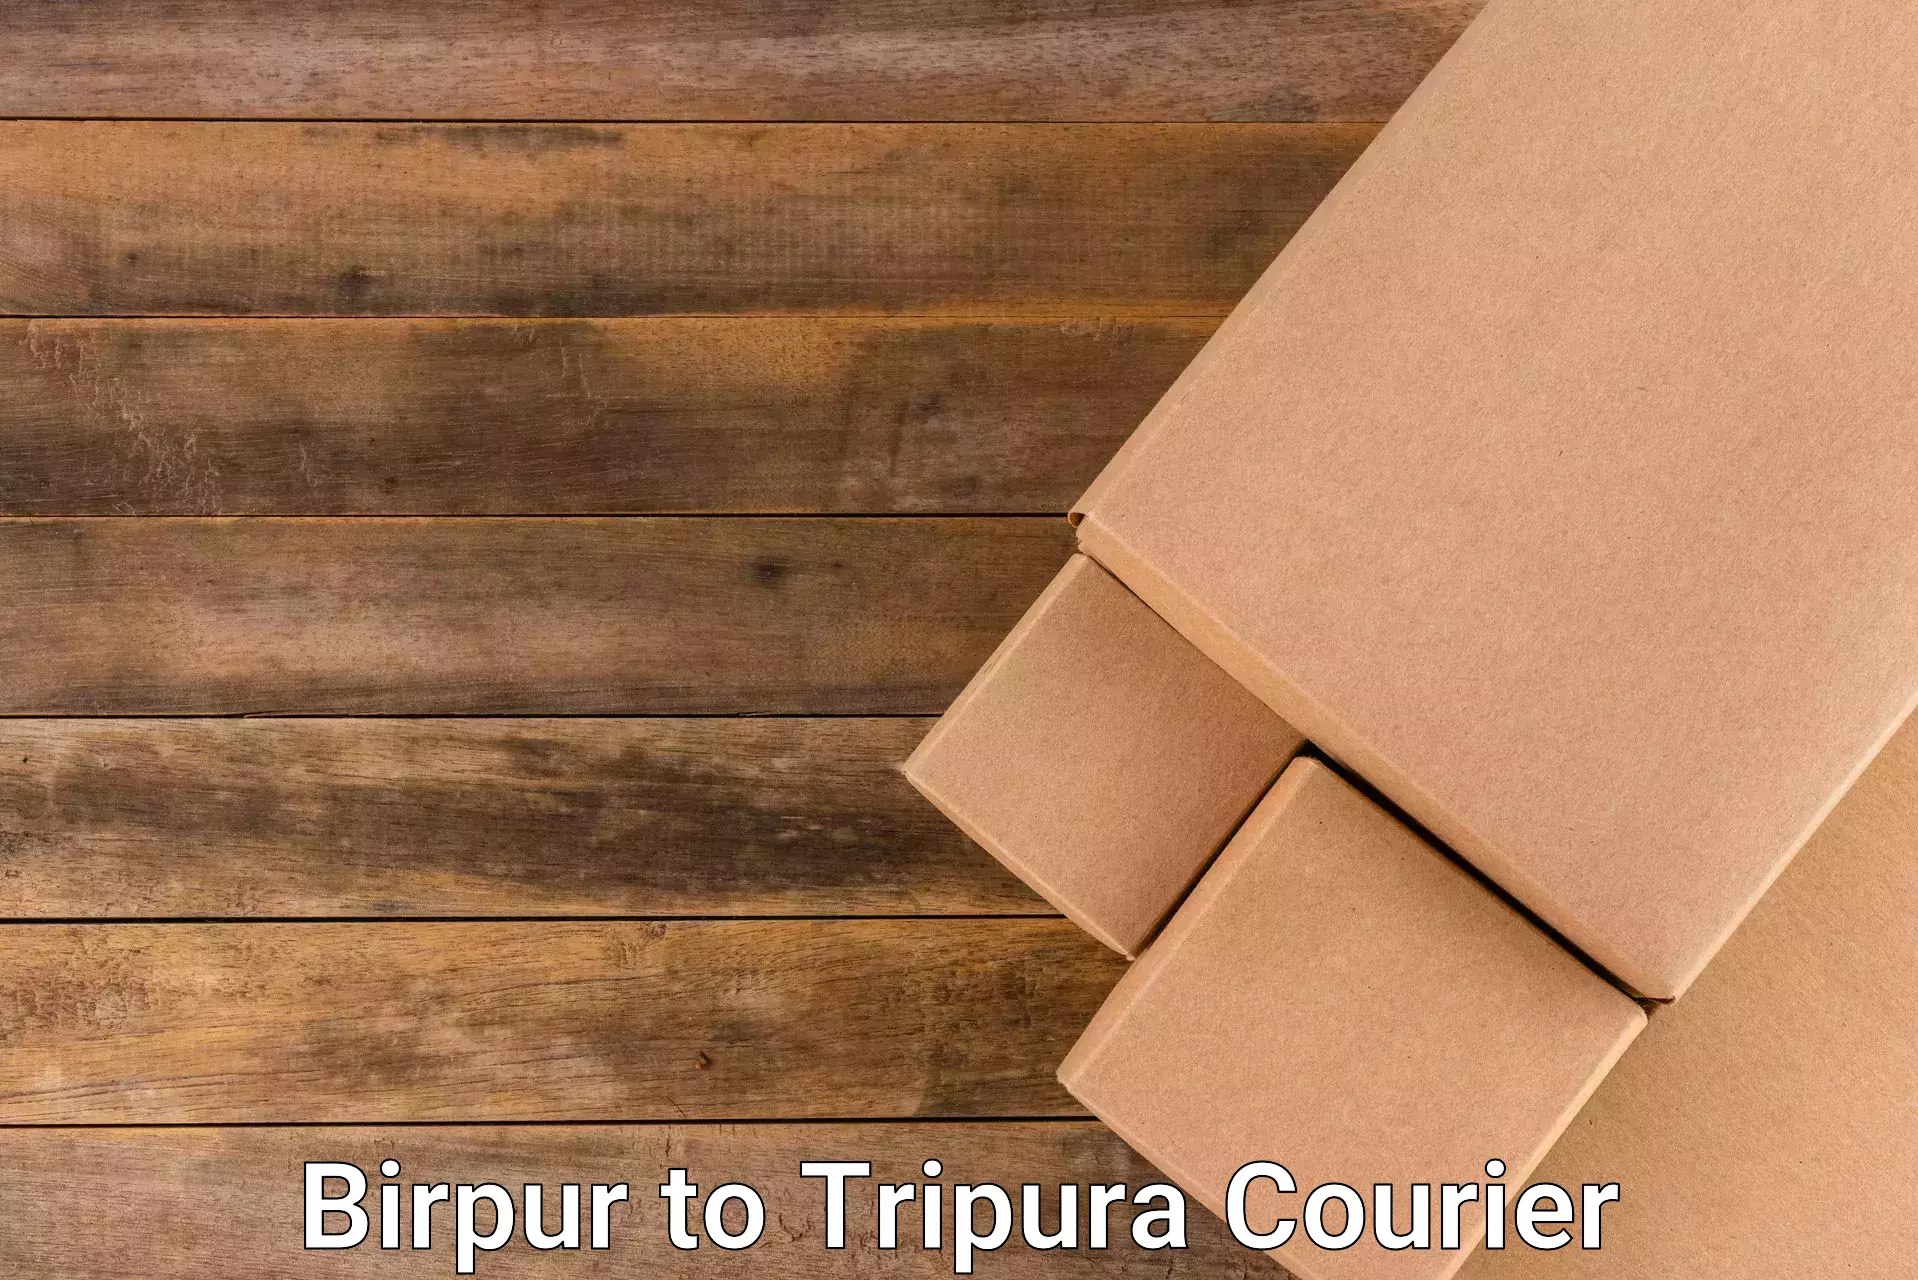 Courier services in Birpur to Udaipur Tripura